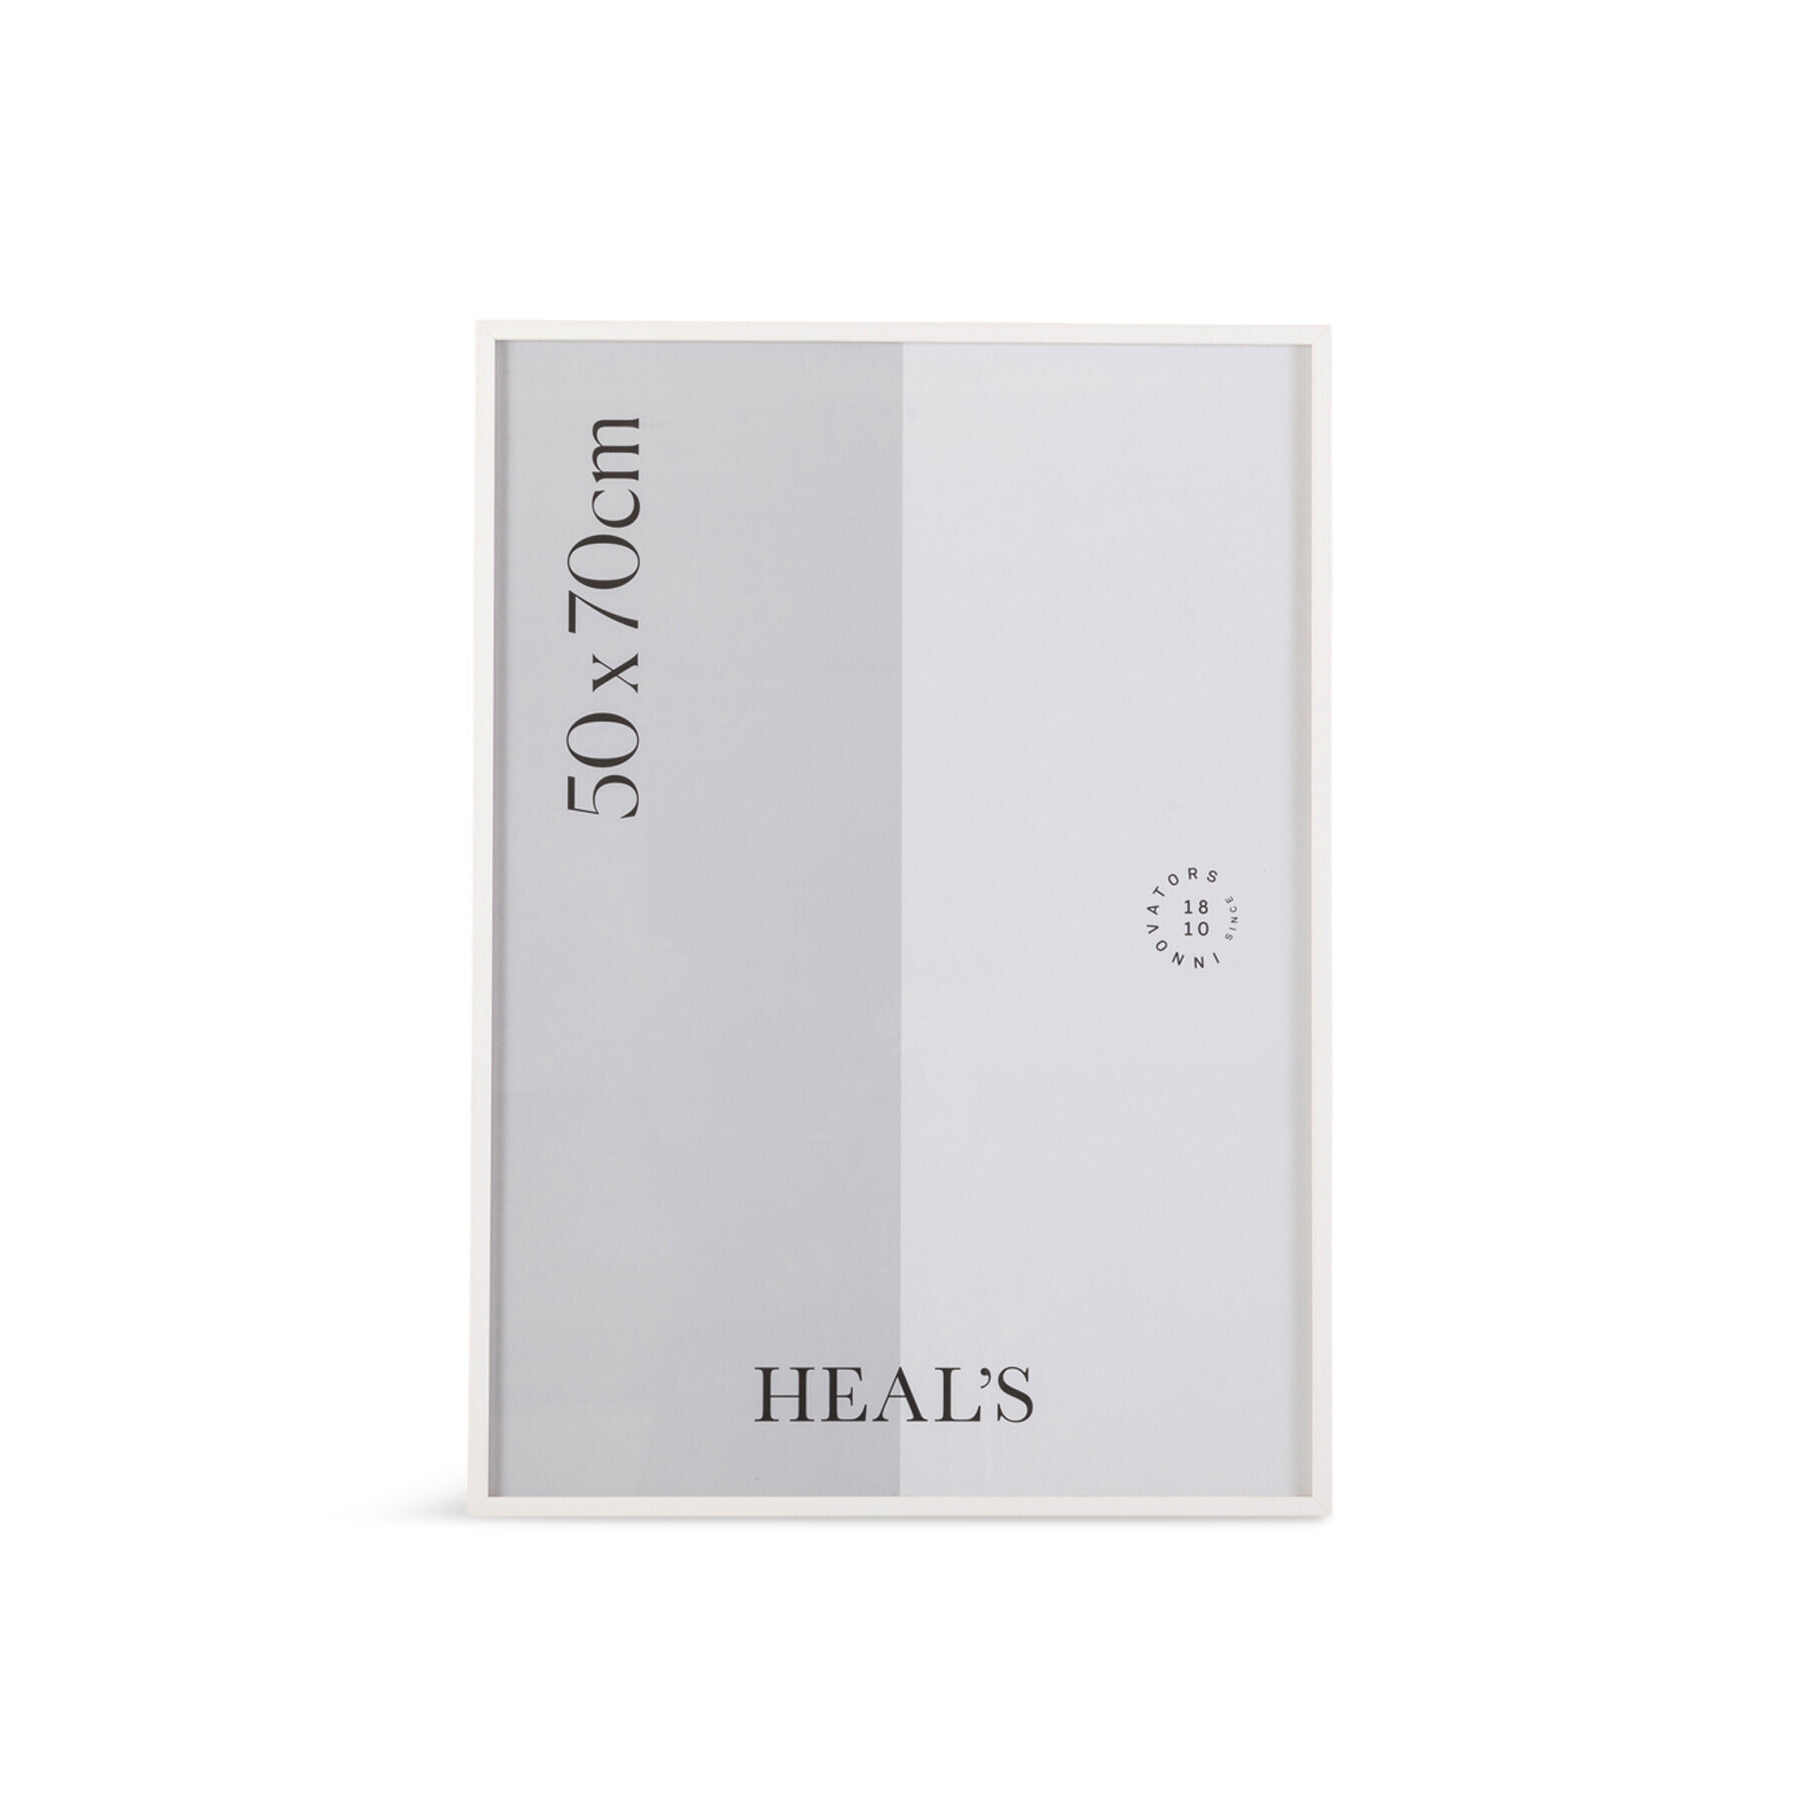 Heal's Gallery Frame - Size 50x70 White - image 1